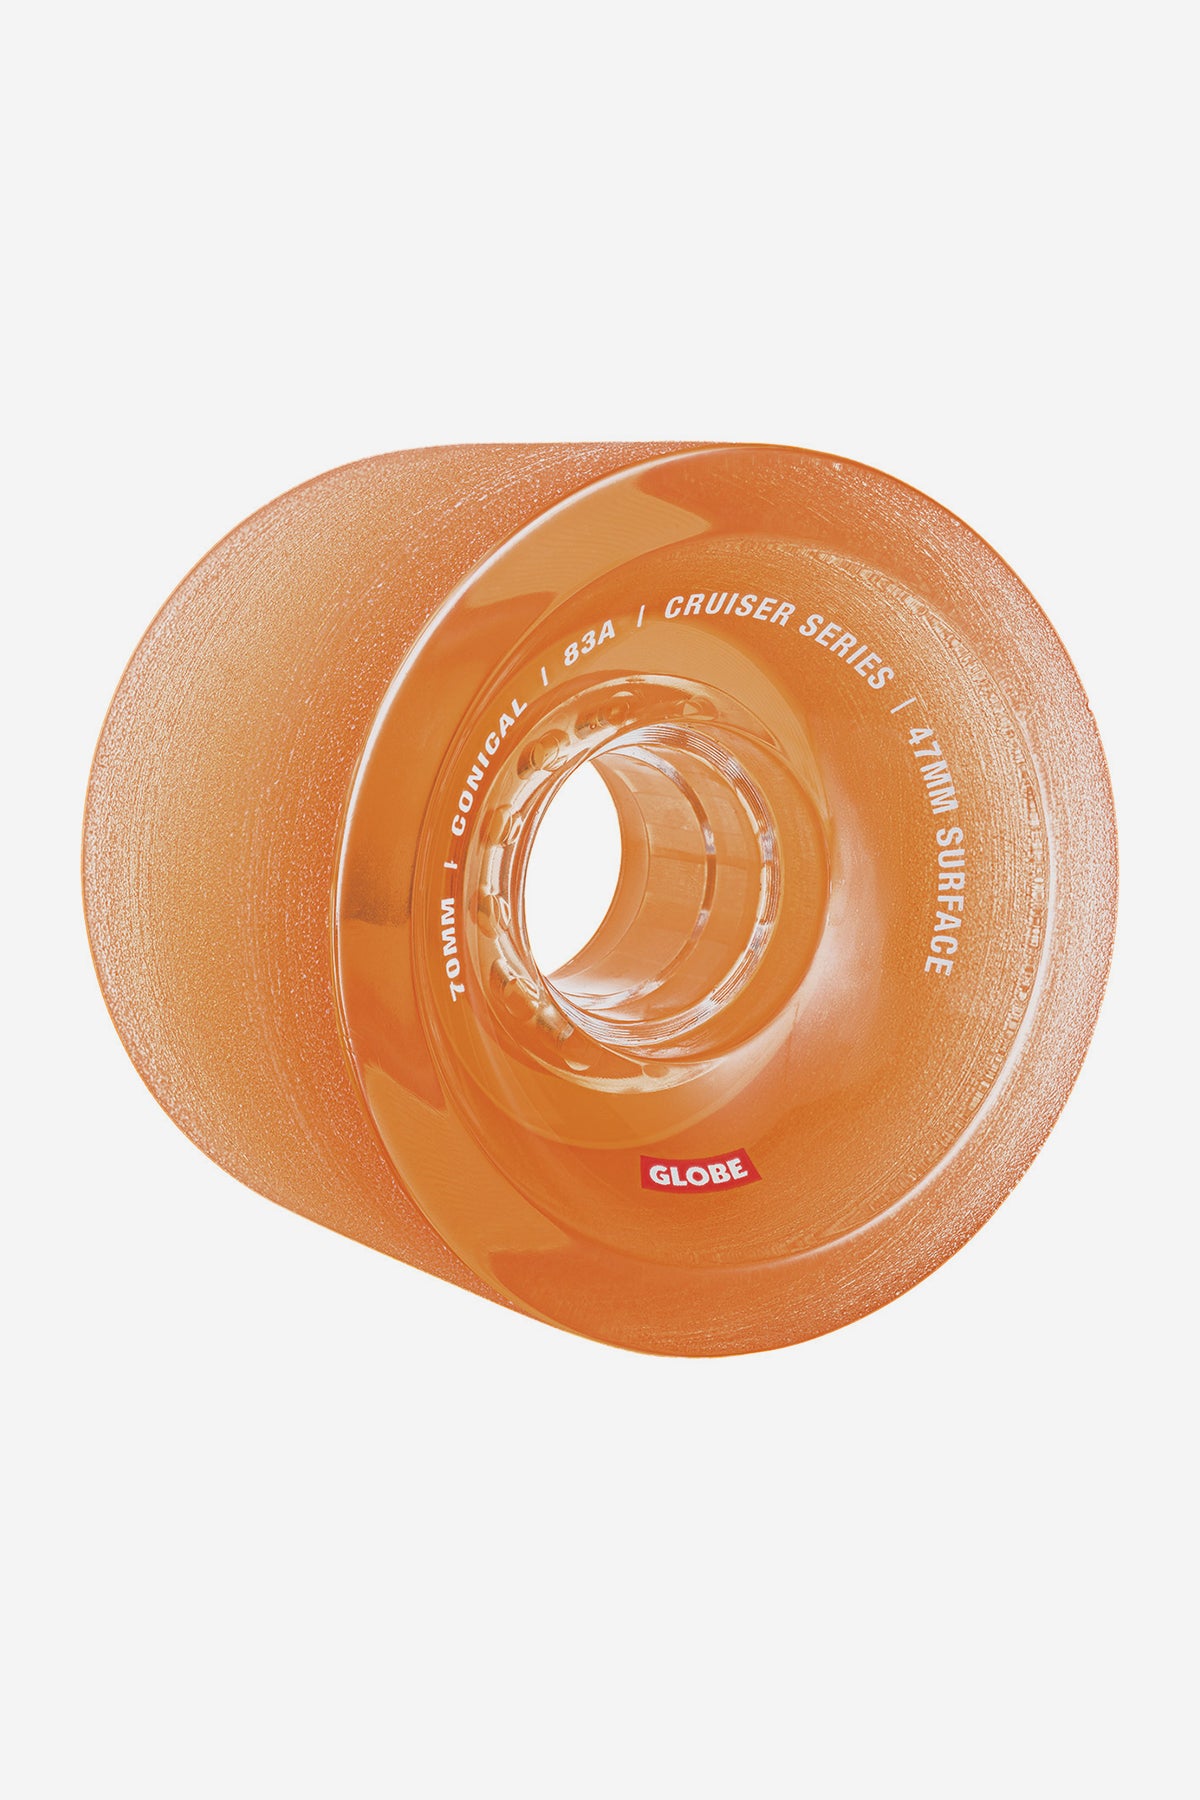 detail of Conical Cruiser Wheel 70mm - clear amber